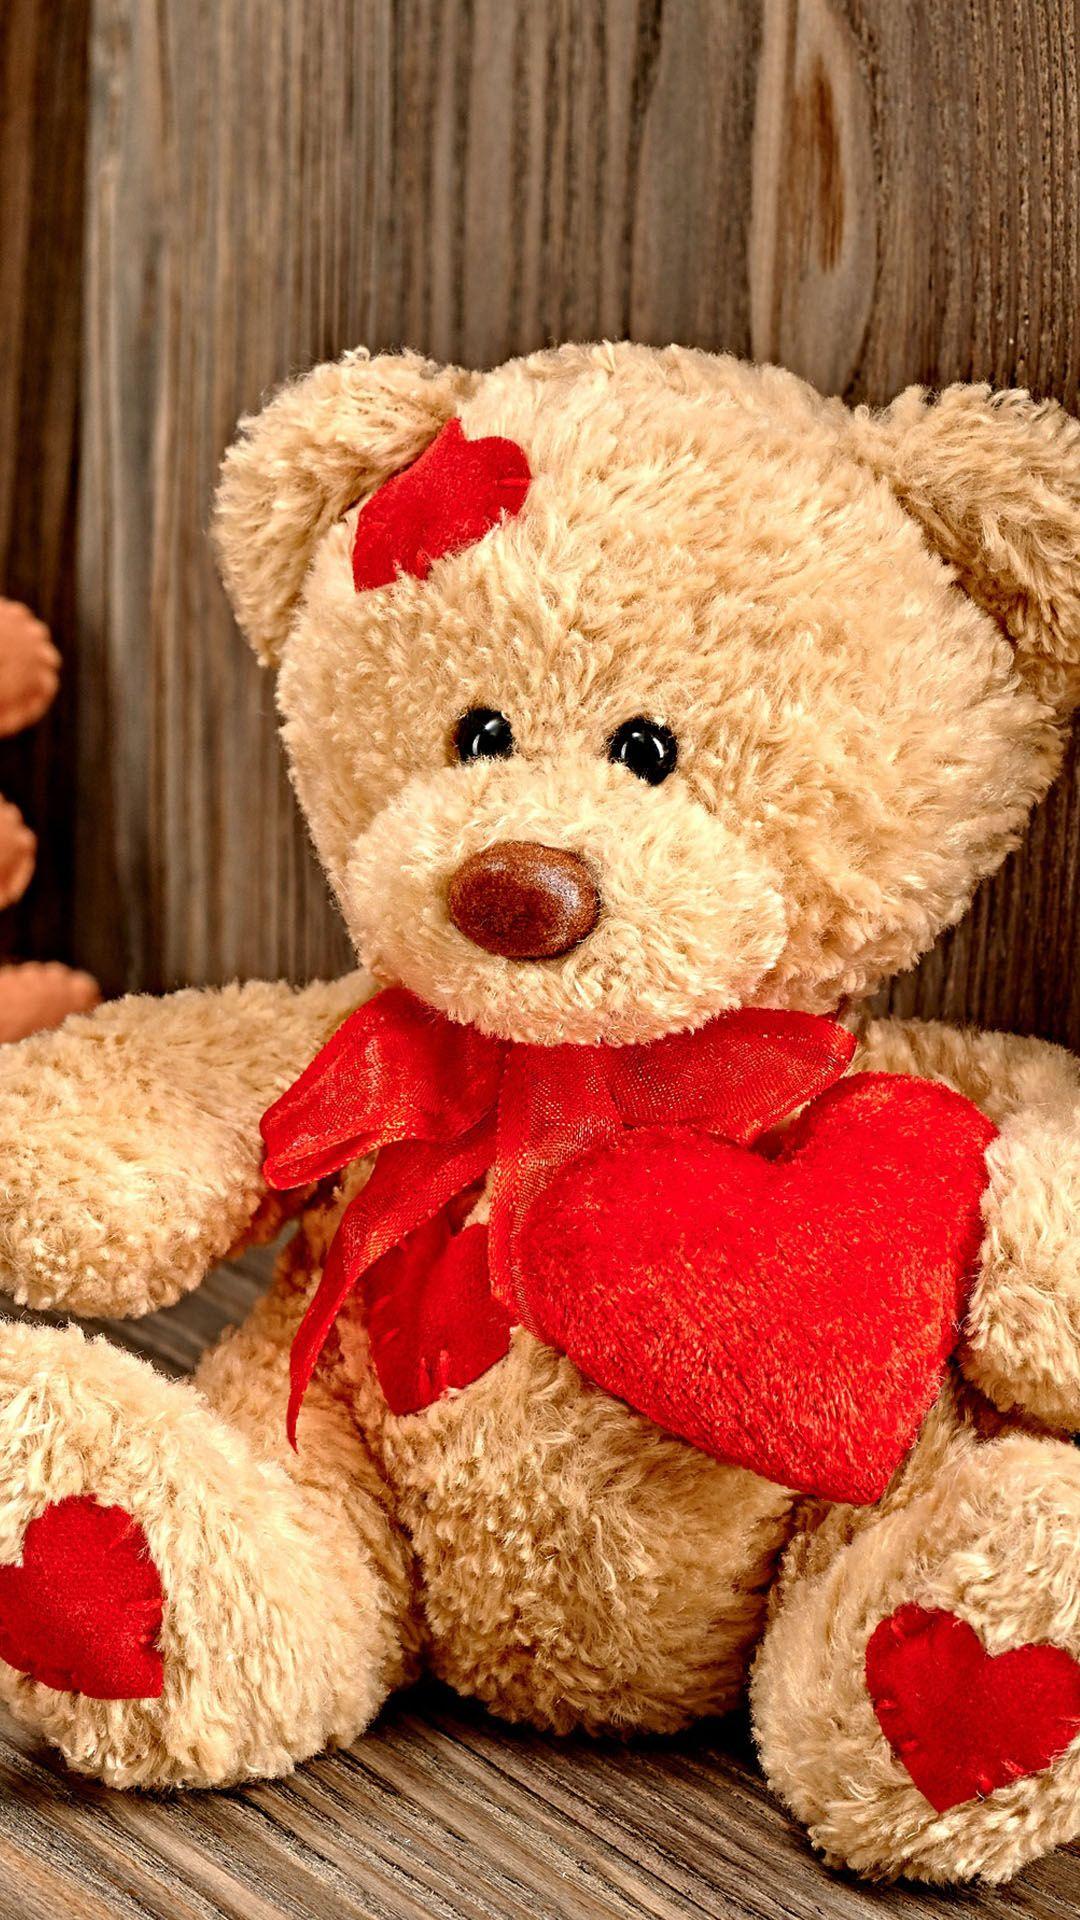 Teddy Bear Love iPhone 6 and 6 Plus HD Wallpaper. Daily iPhone 6